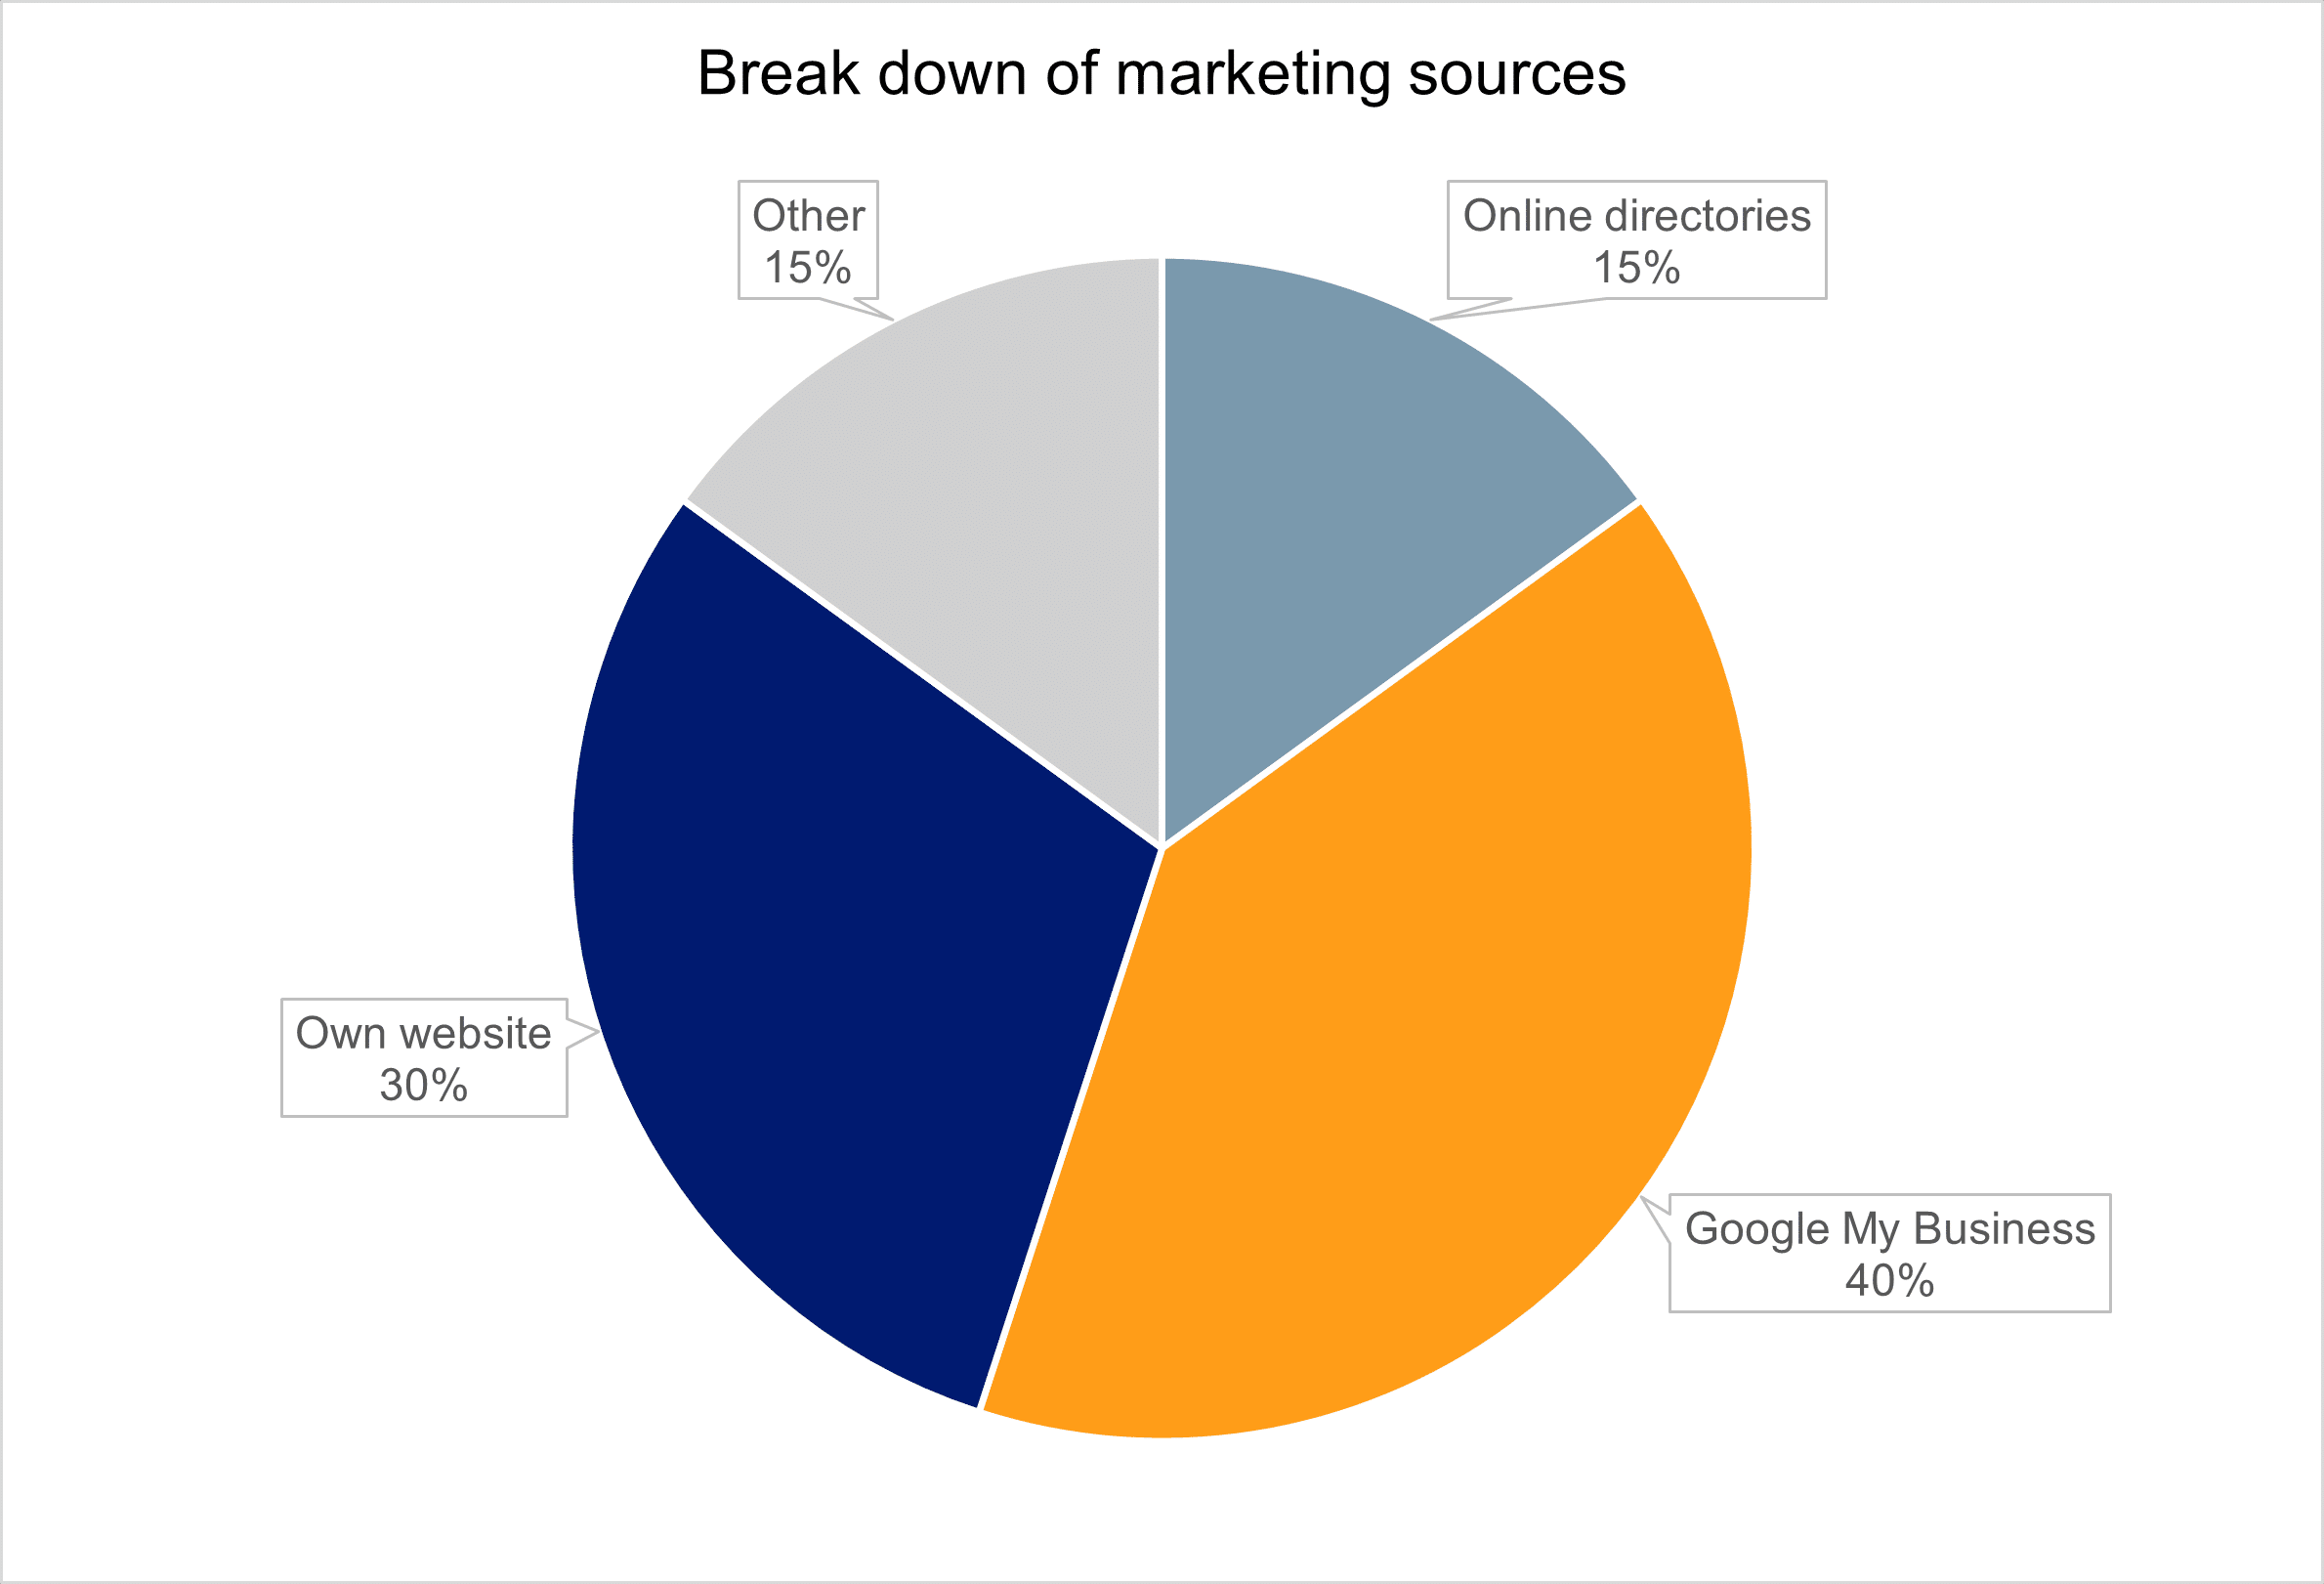 Breakdown of calls by marketing sources pie chart.